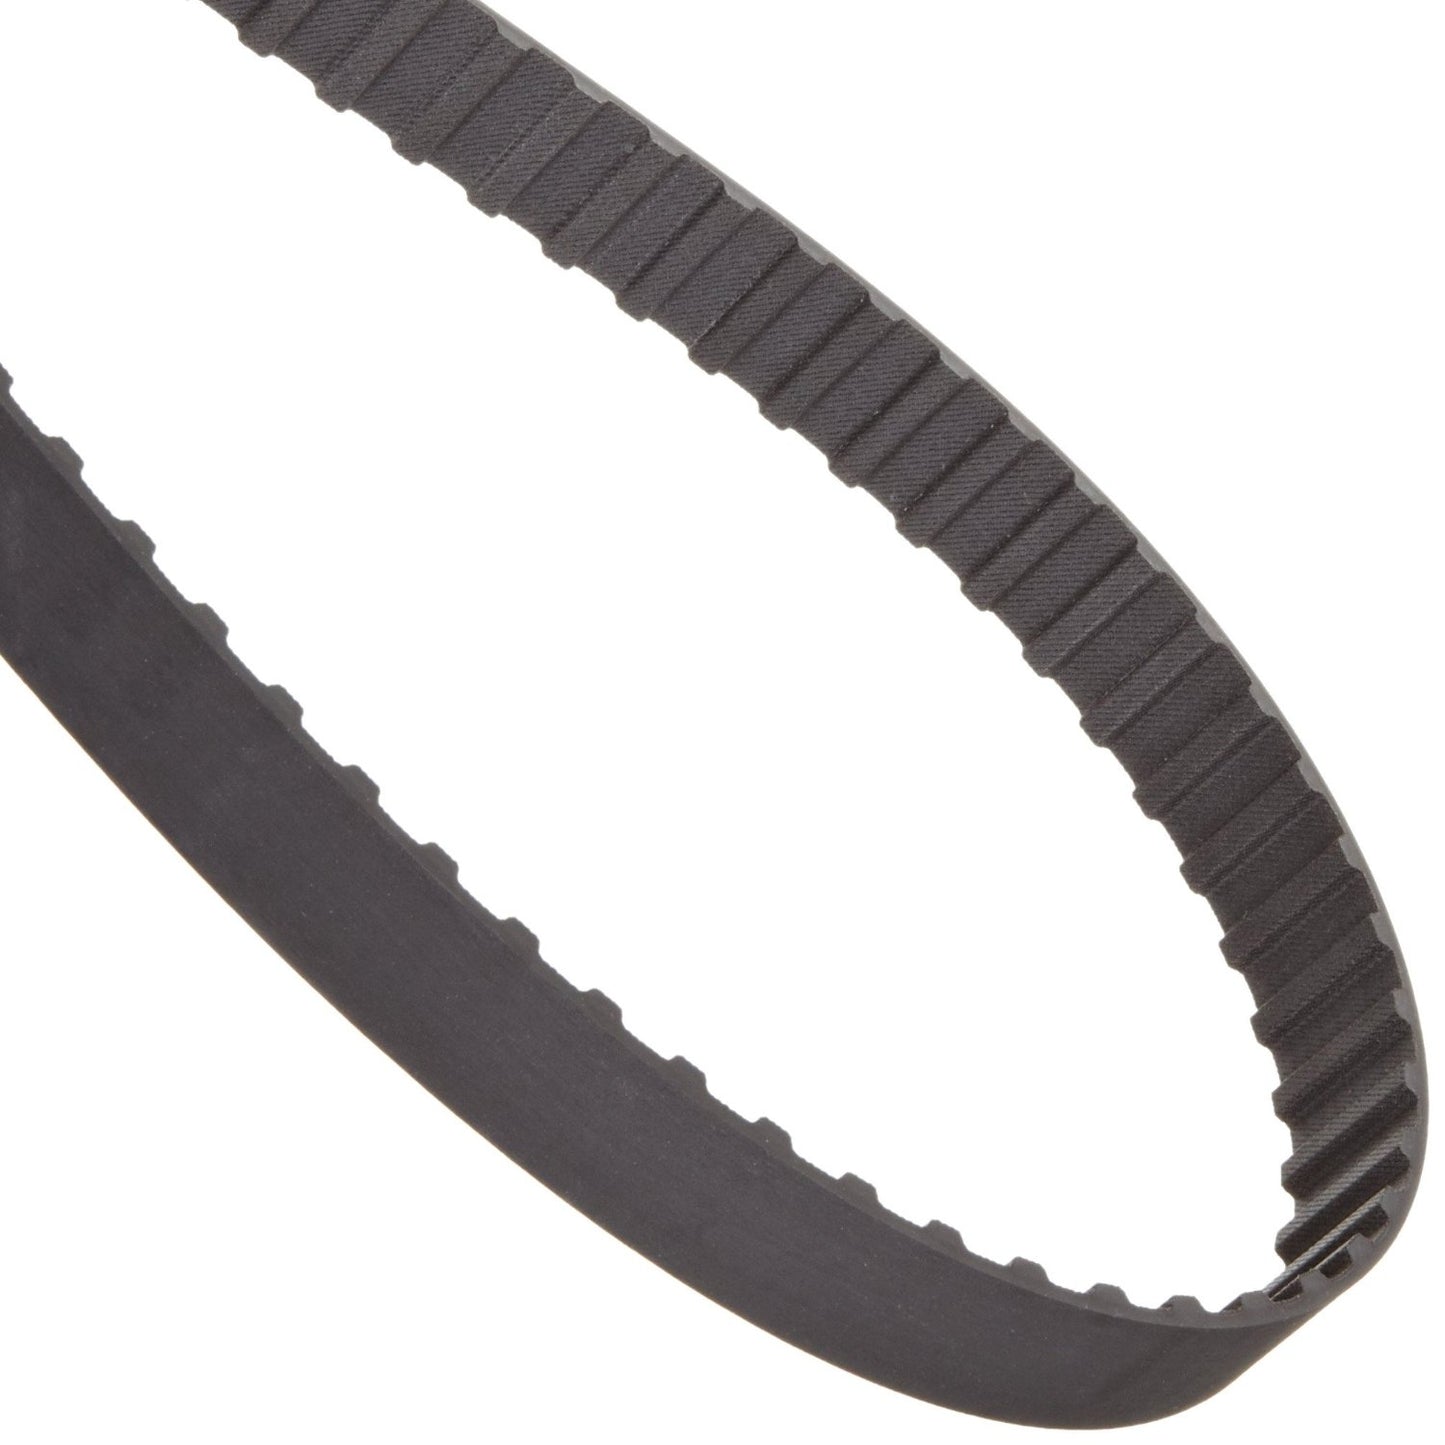 Drive BELT for Sears Craftsman Lathe P/N 18042.00 18042 FREE SHIPPING to All 50 STATES